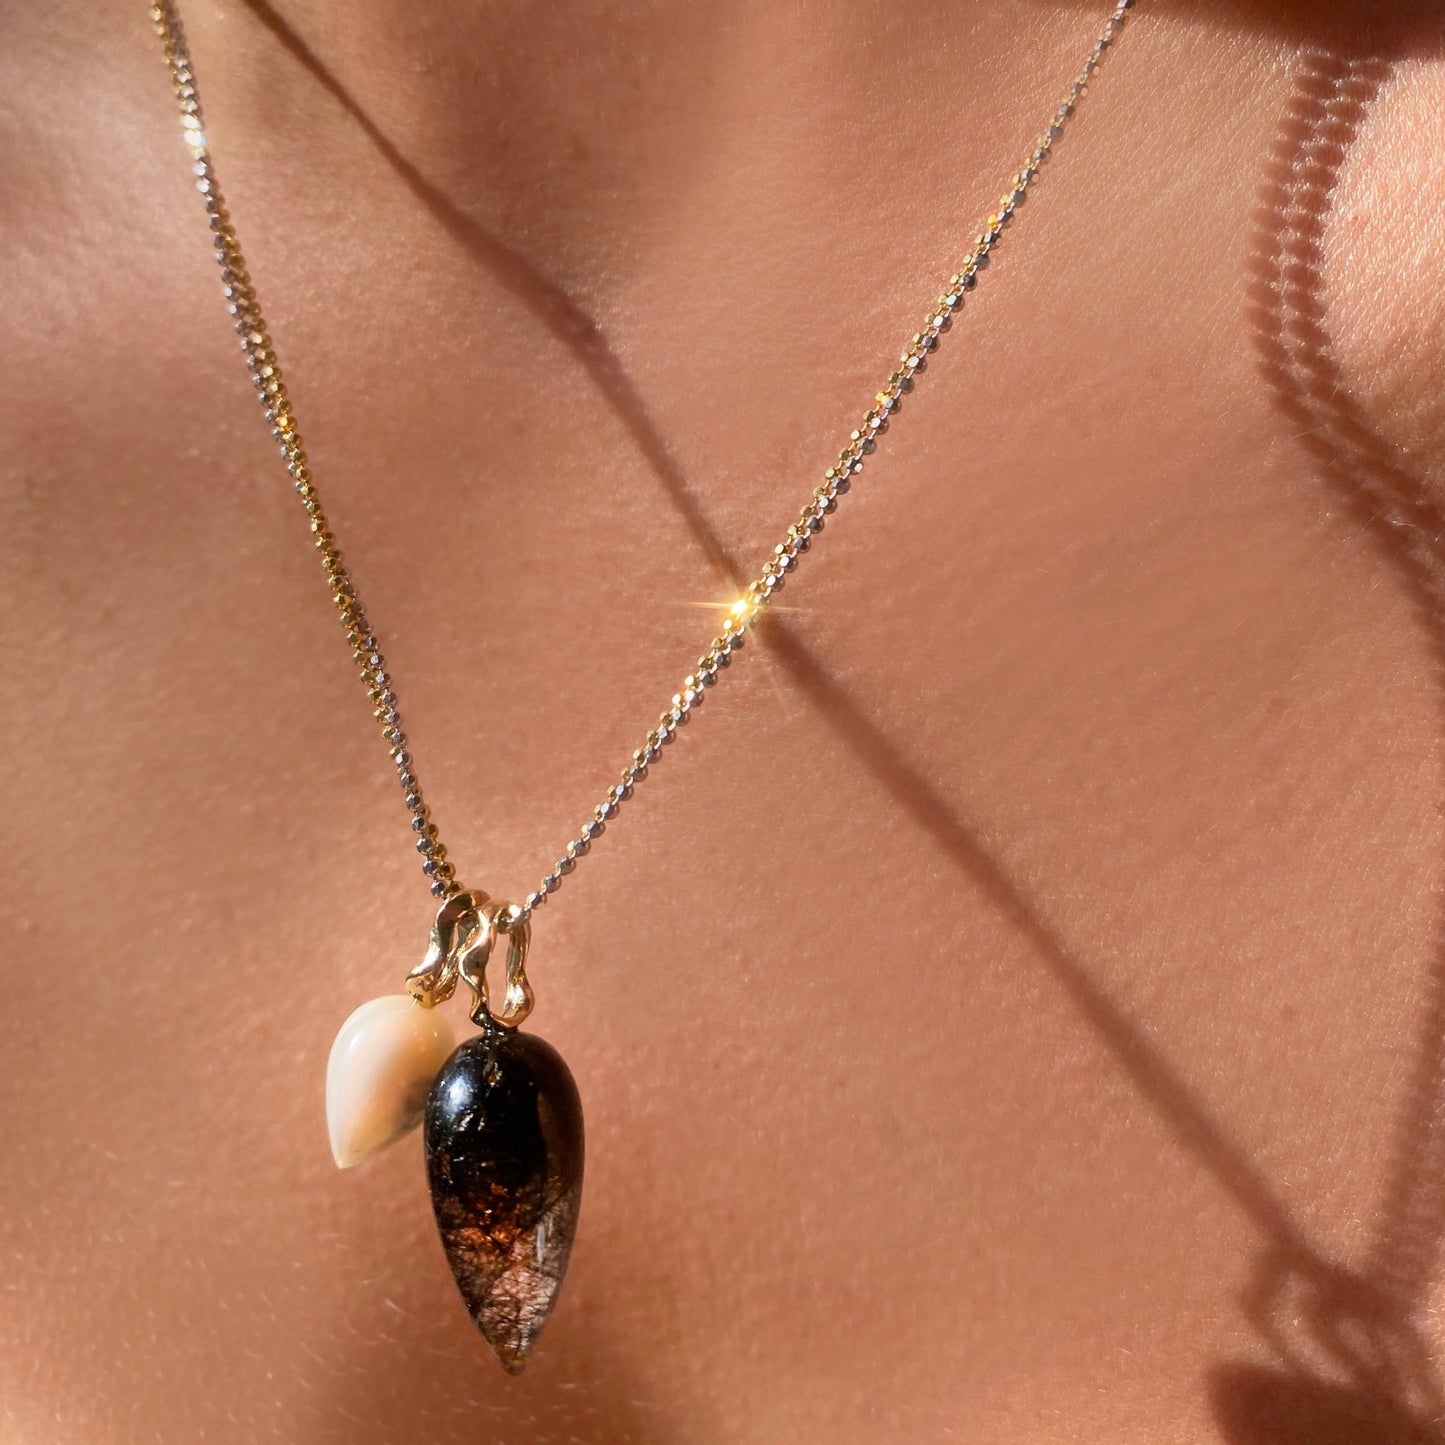 Mother of Pearl acorn drop charm. Styled on a neck with one other acorn drop charm hanging from a diamond cut bead chain necklace.